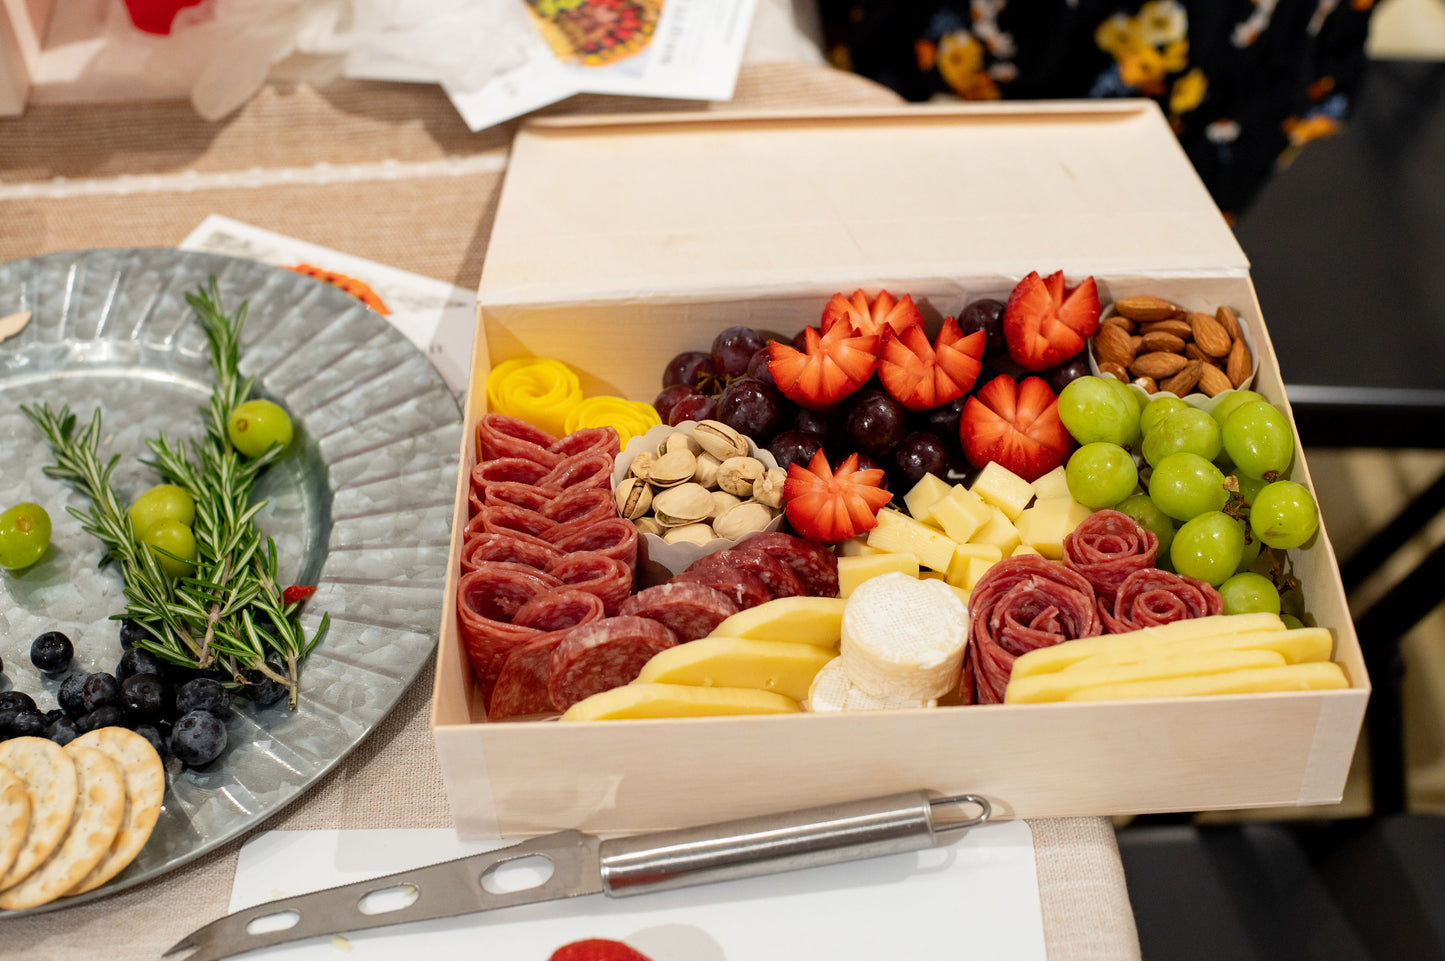 Charcuterie Board Workshop - Thursday September 15th at 6:30pm